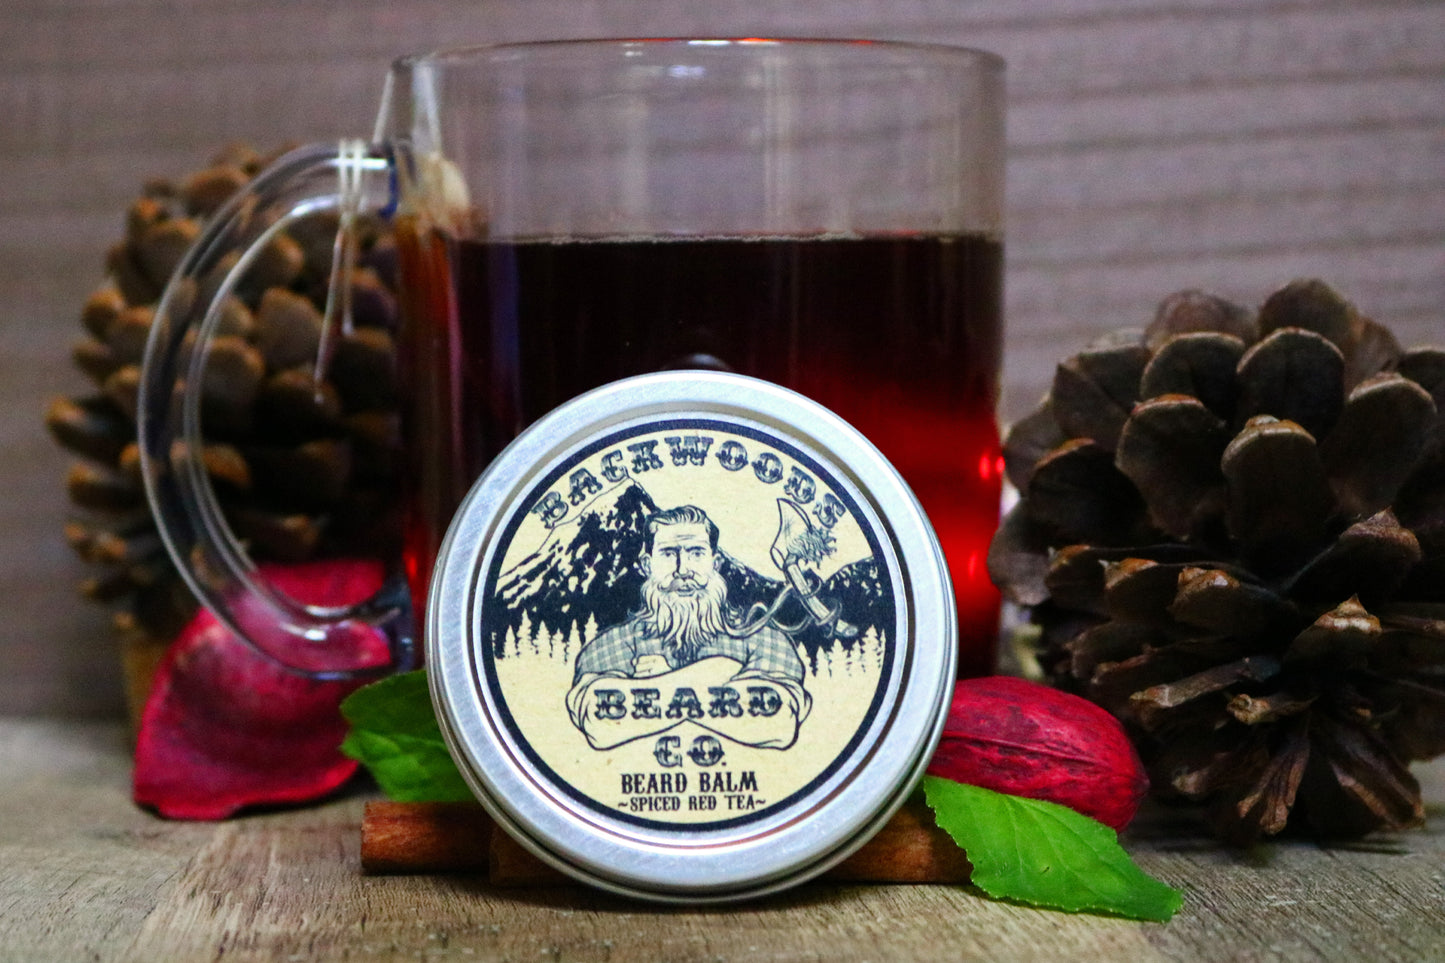 Load image into Gallery viewer, Spiced Red Tea Beard Balm- 2 oz.
